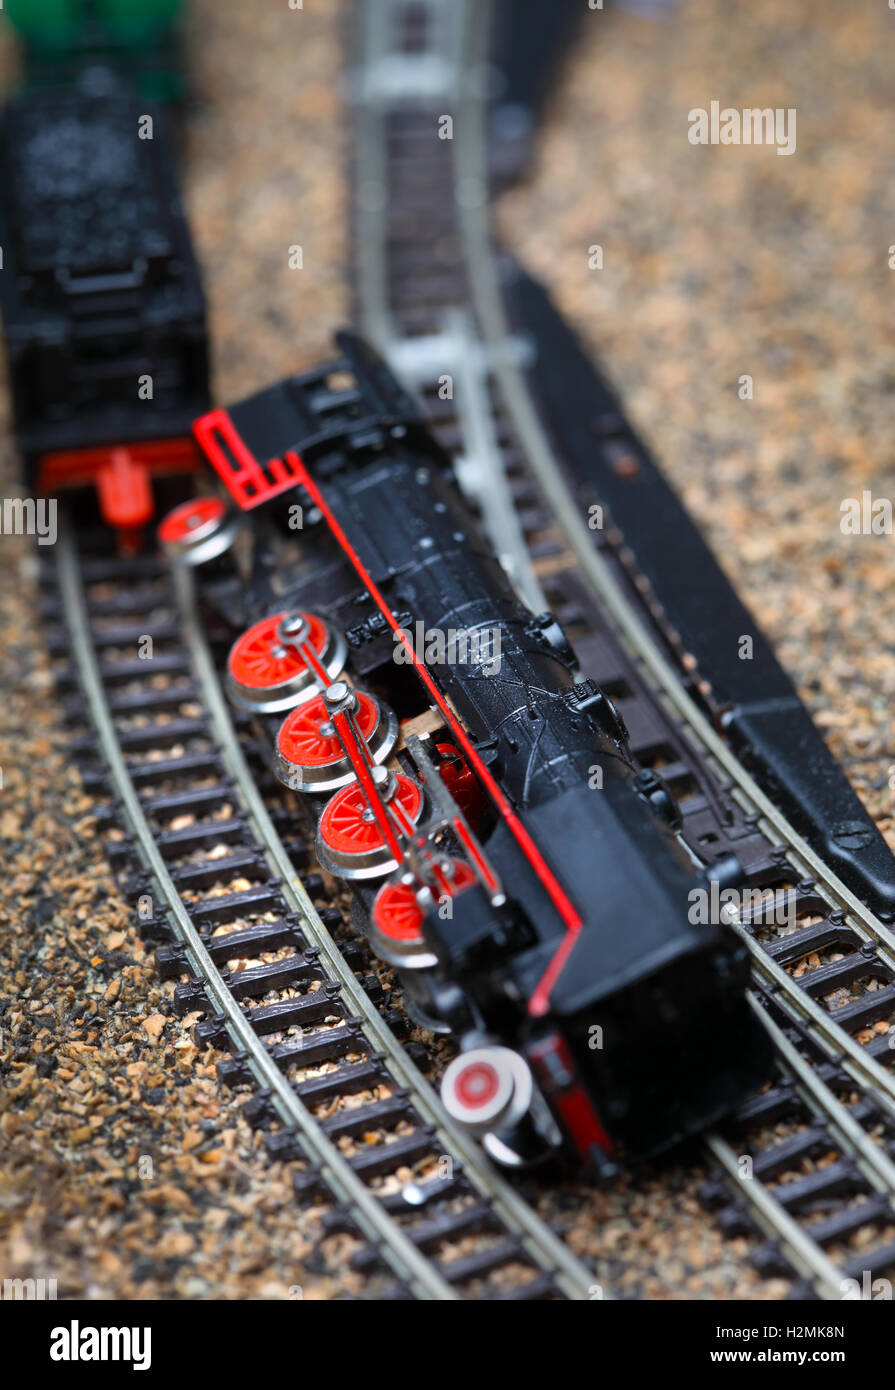 Model Train Crash High Resolution Stock Photography and Images - Alamy